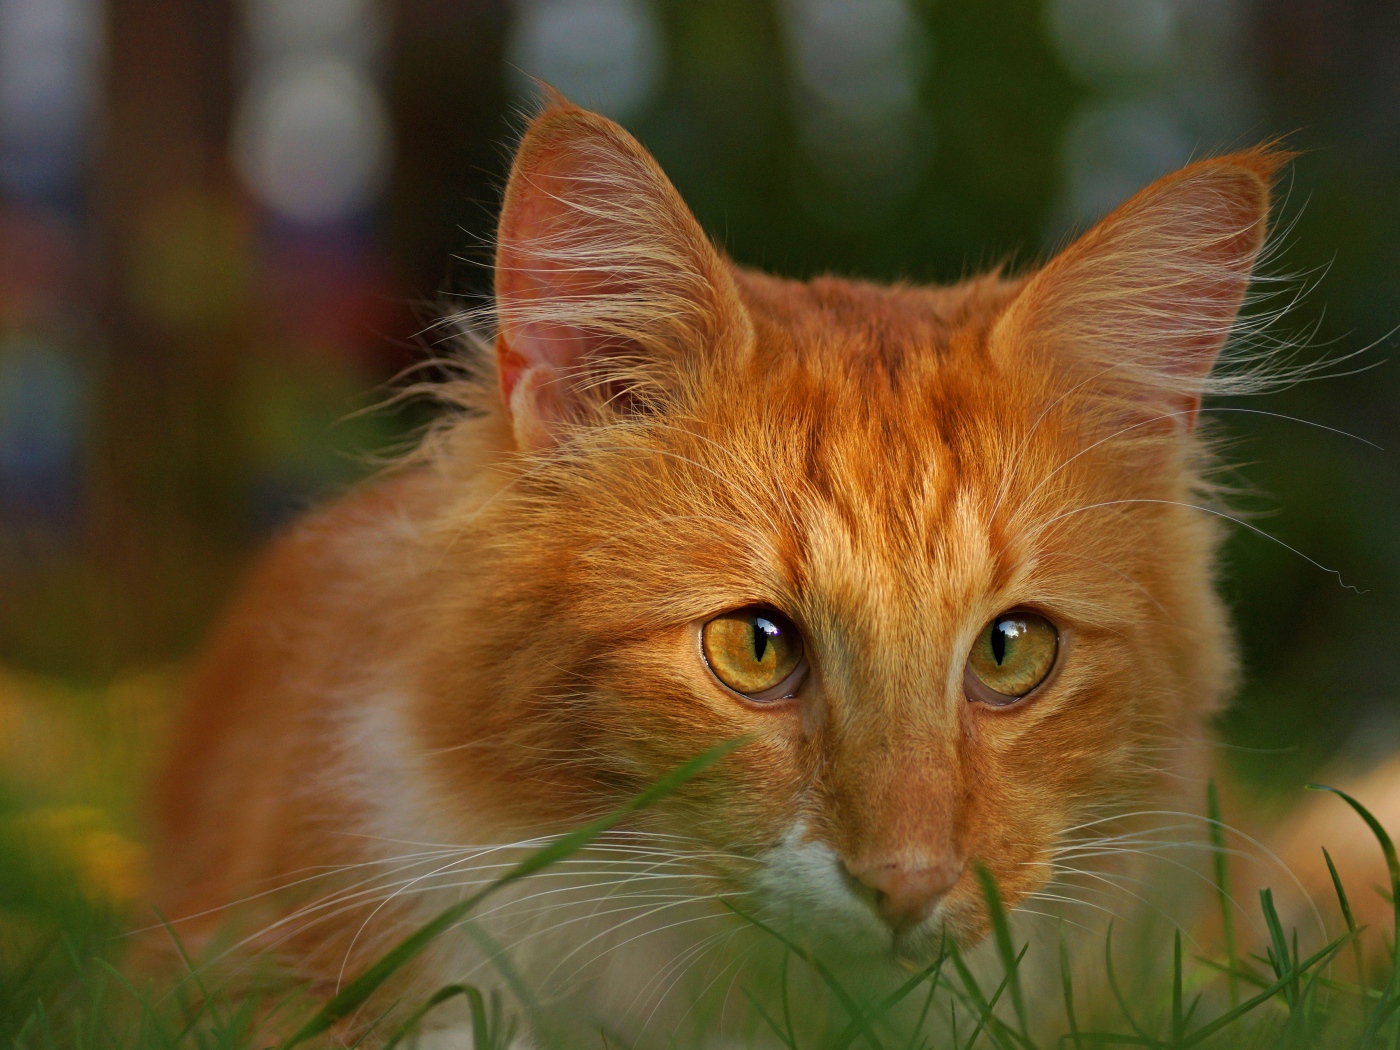 Red cat with funny eyes sits in the green grass.